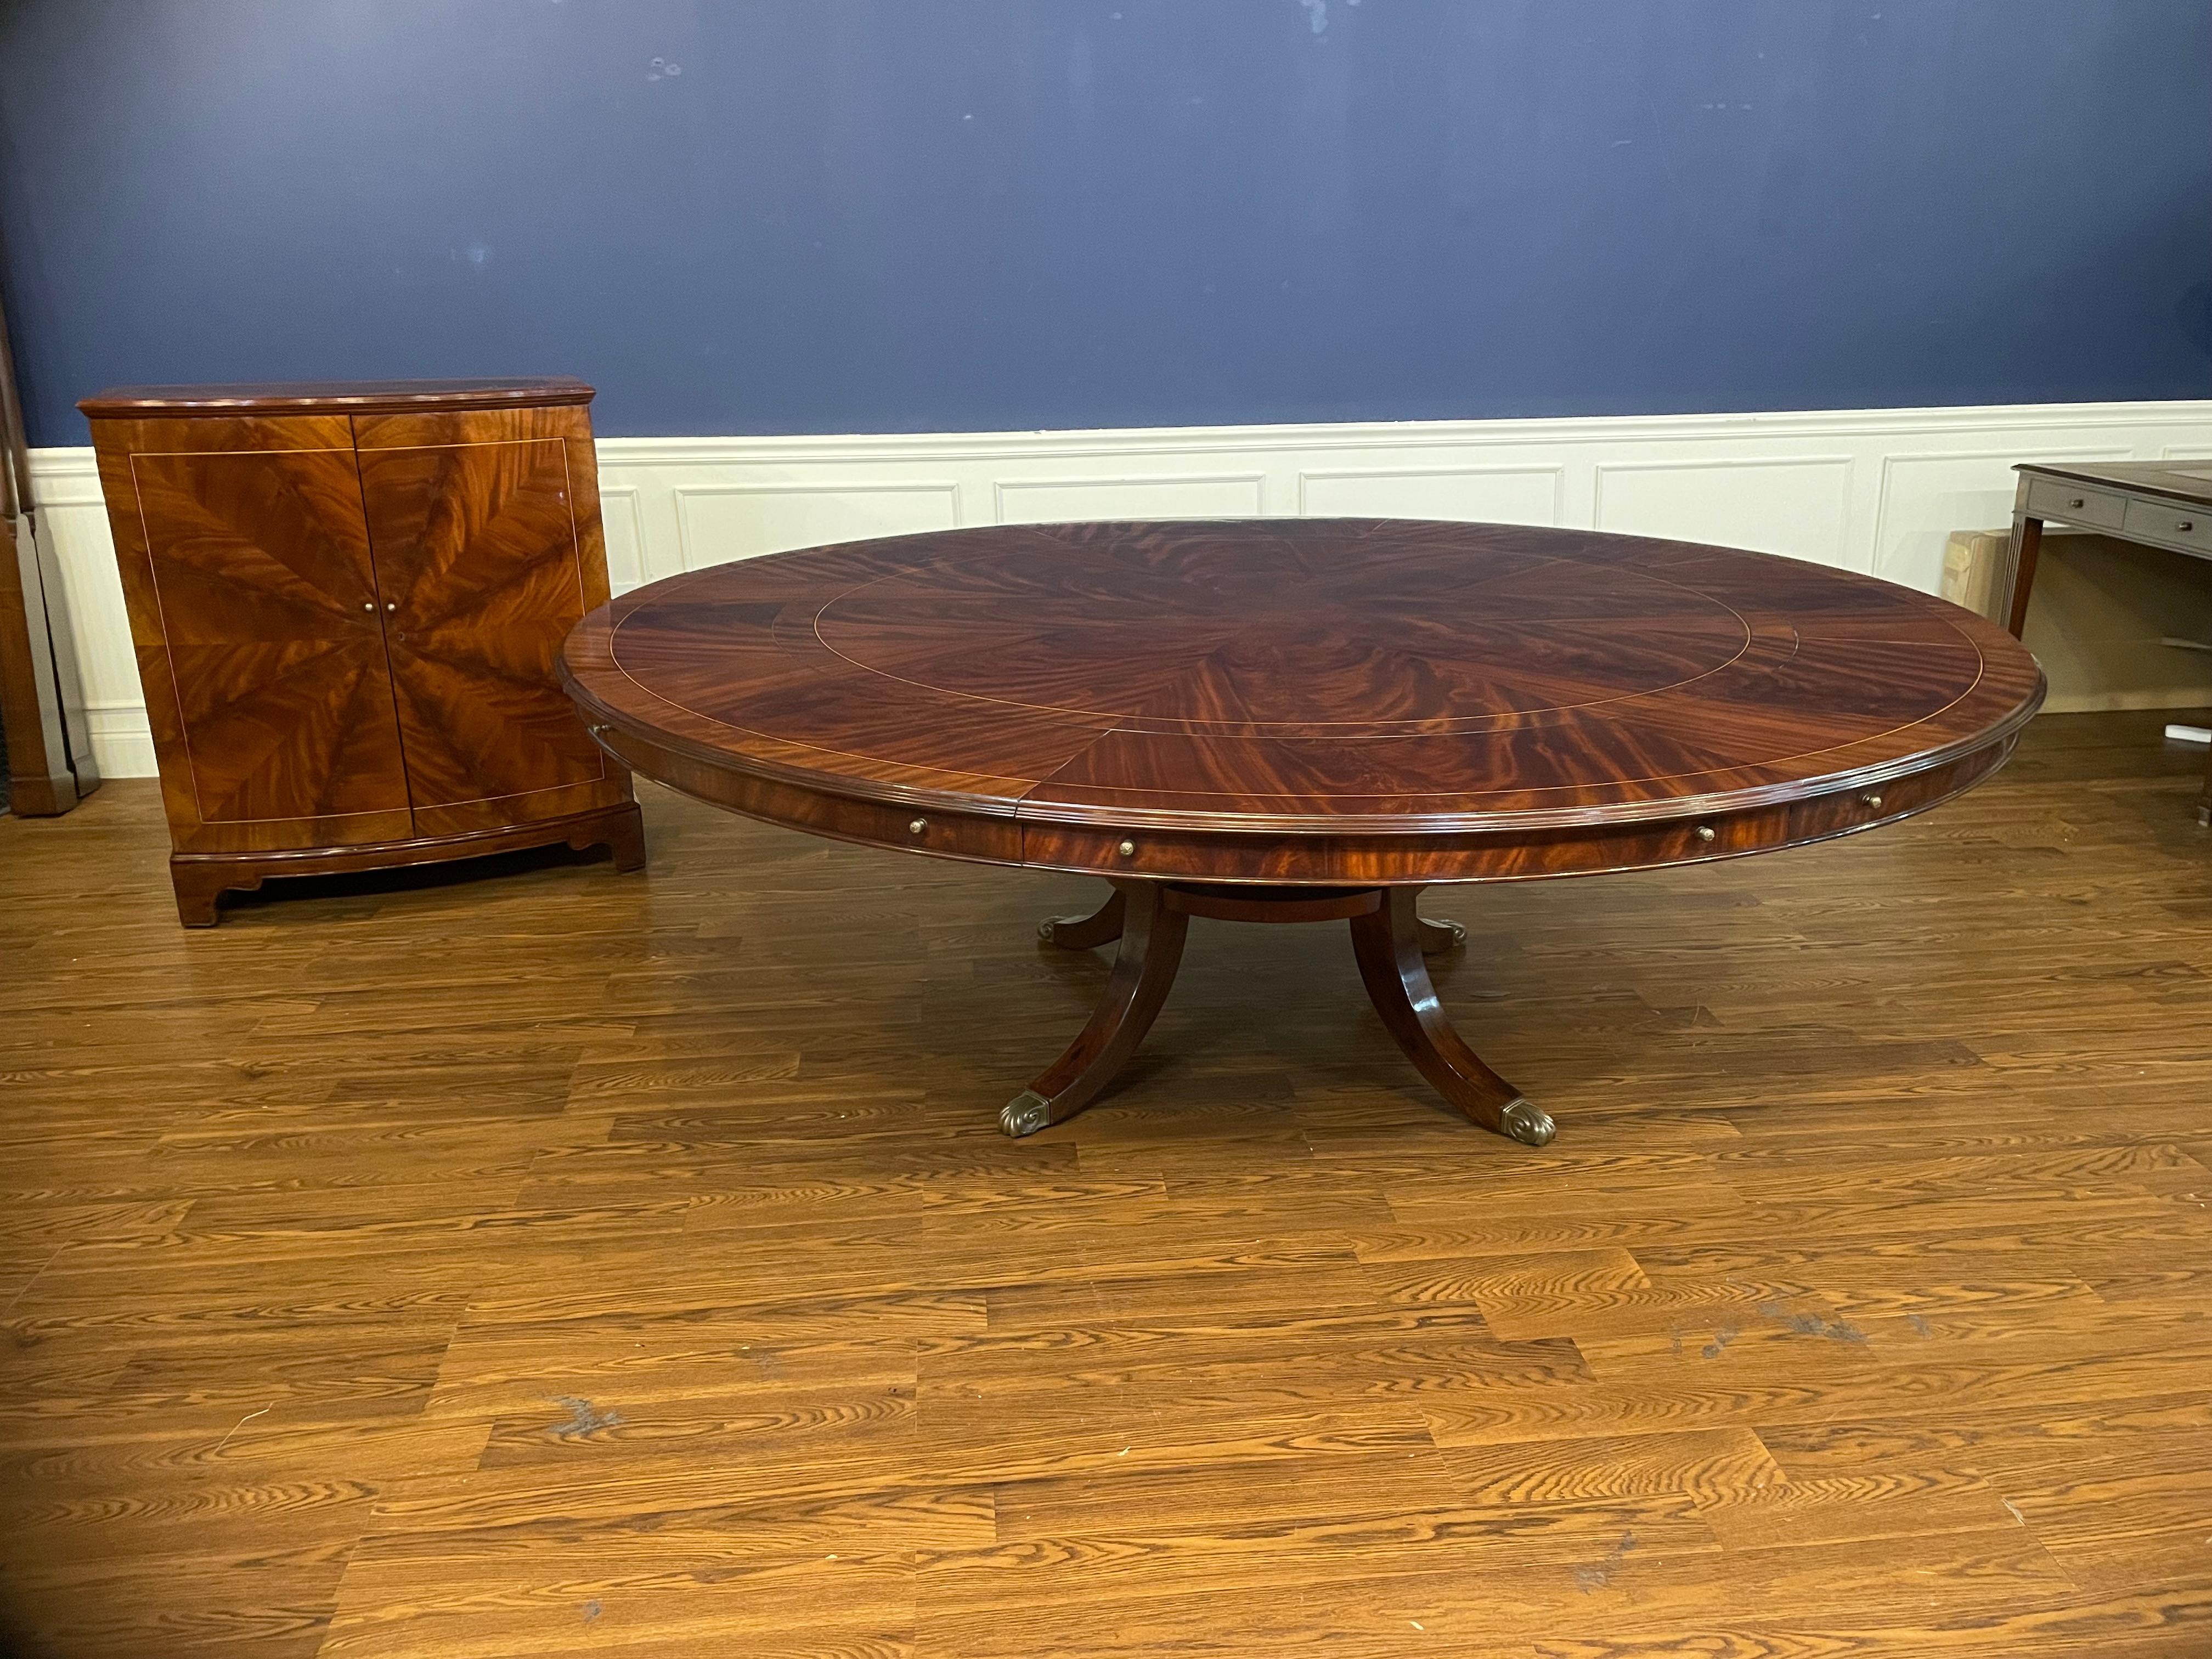 90” Round Mahogany Dining Table w/Leaf Storage Cabinet by Leighton Hall For Sale 4